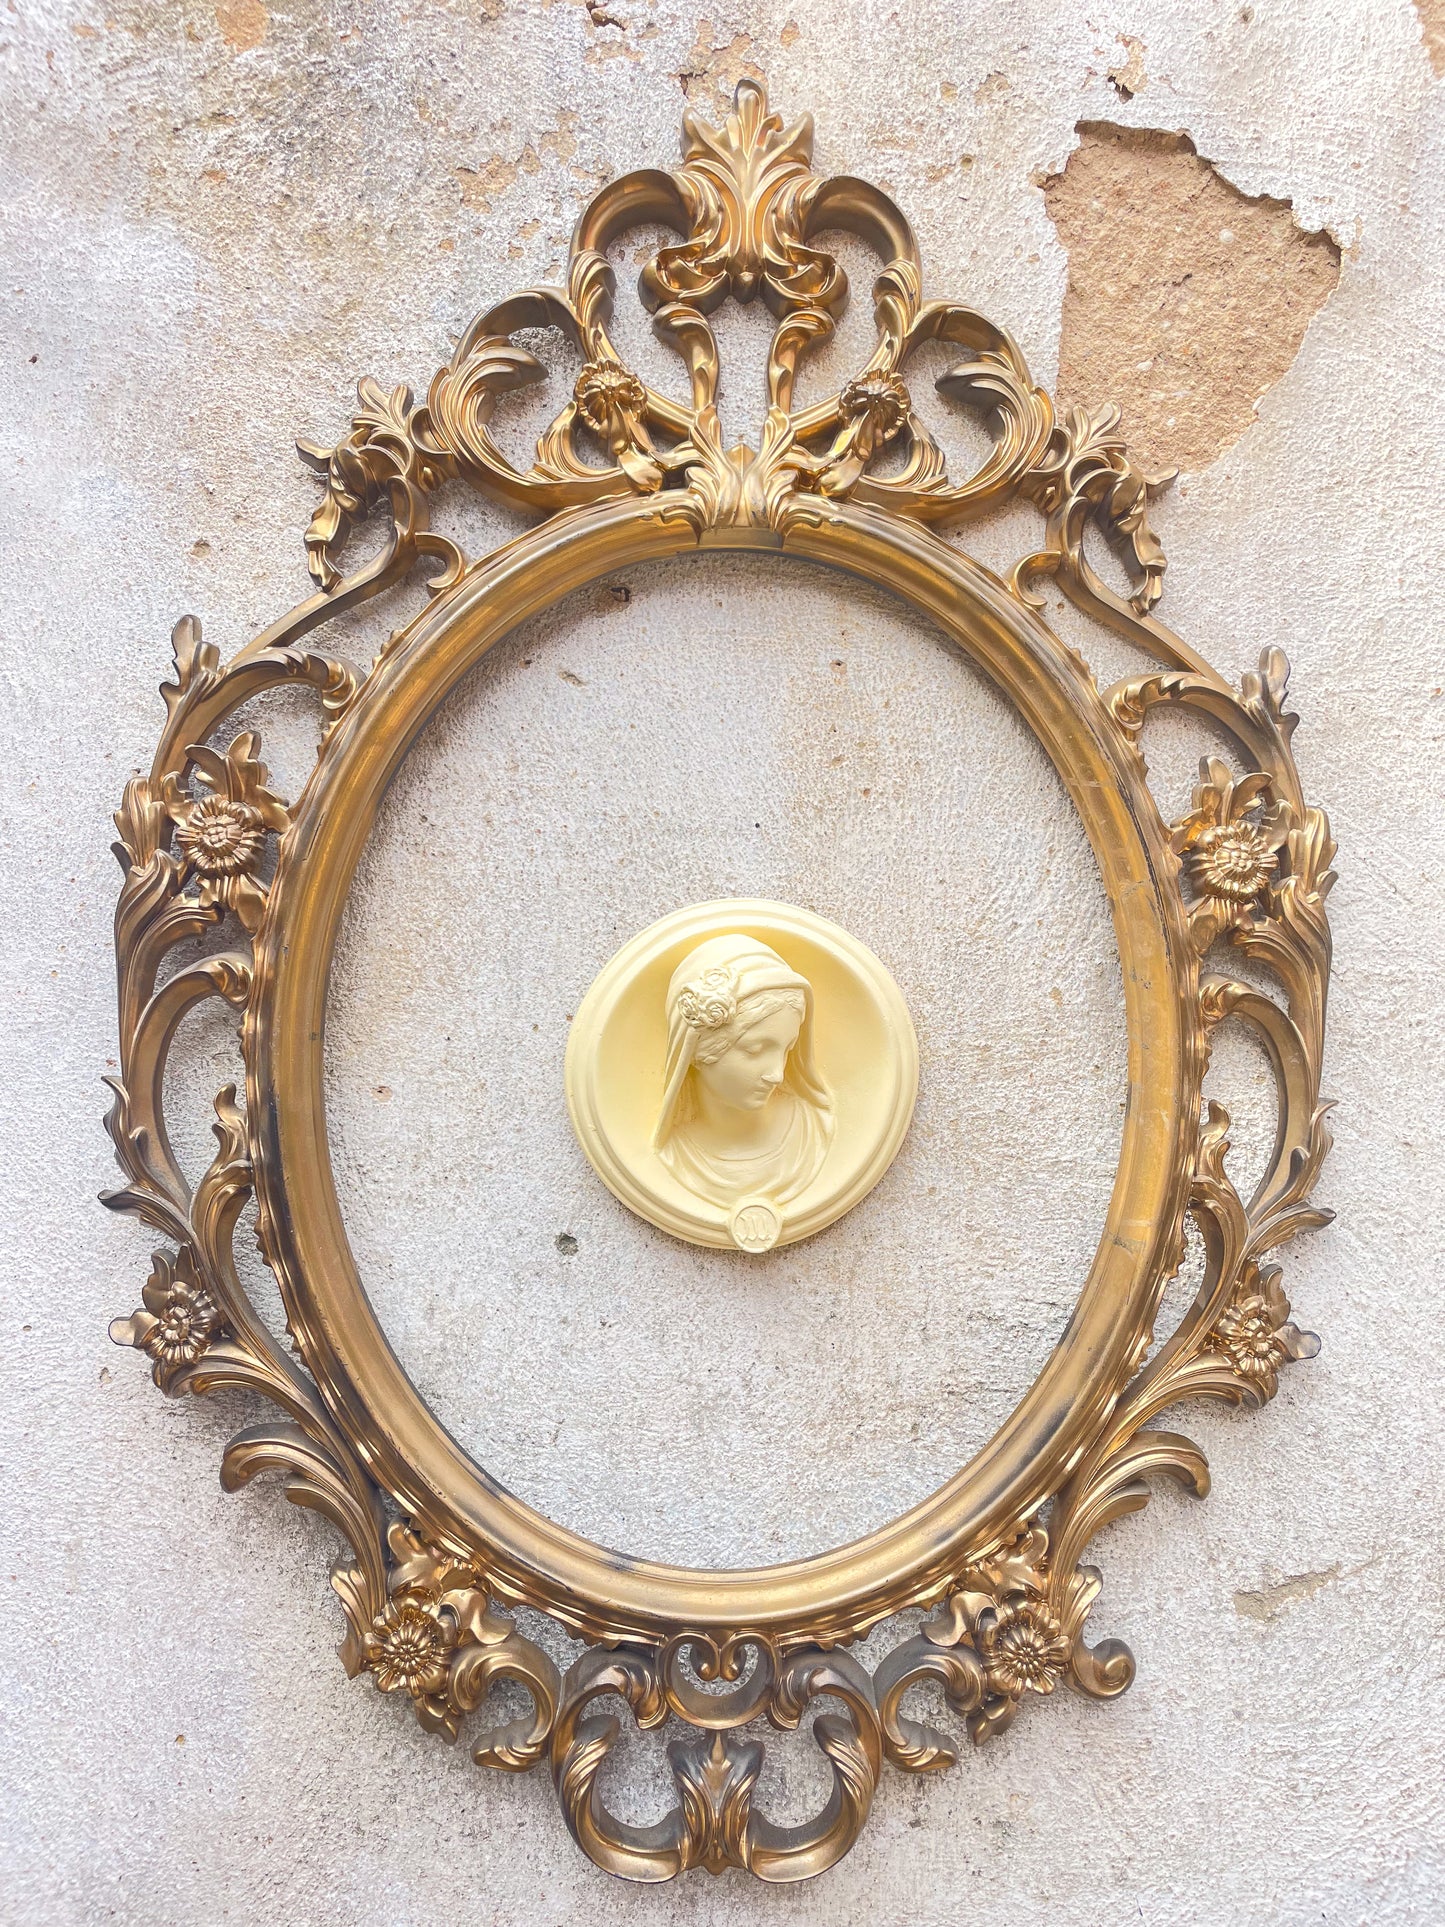 Ex-voto face of Mary in relief "Selfie"